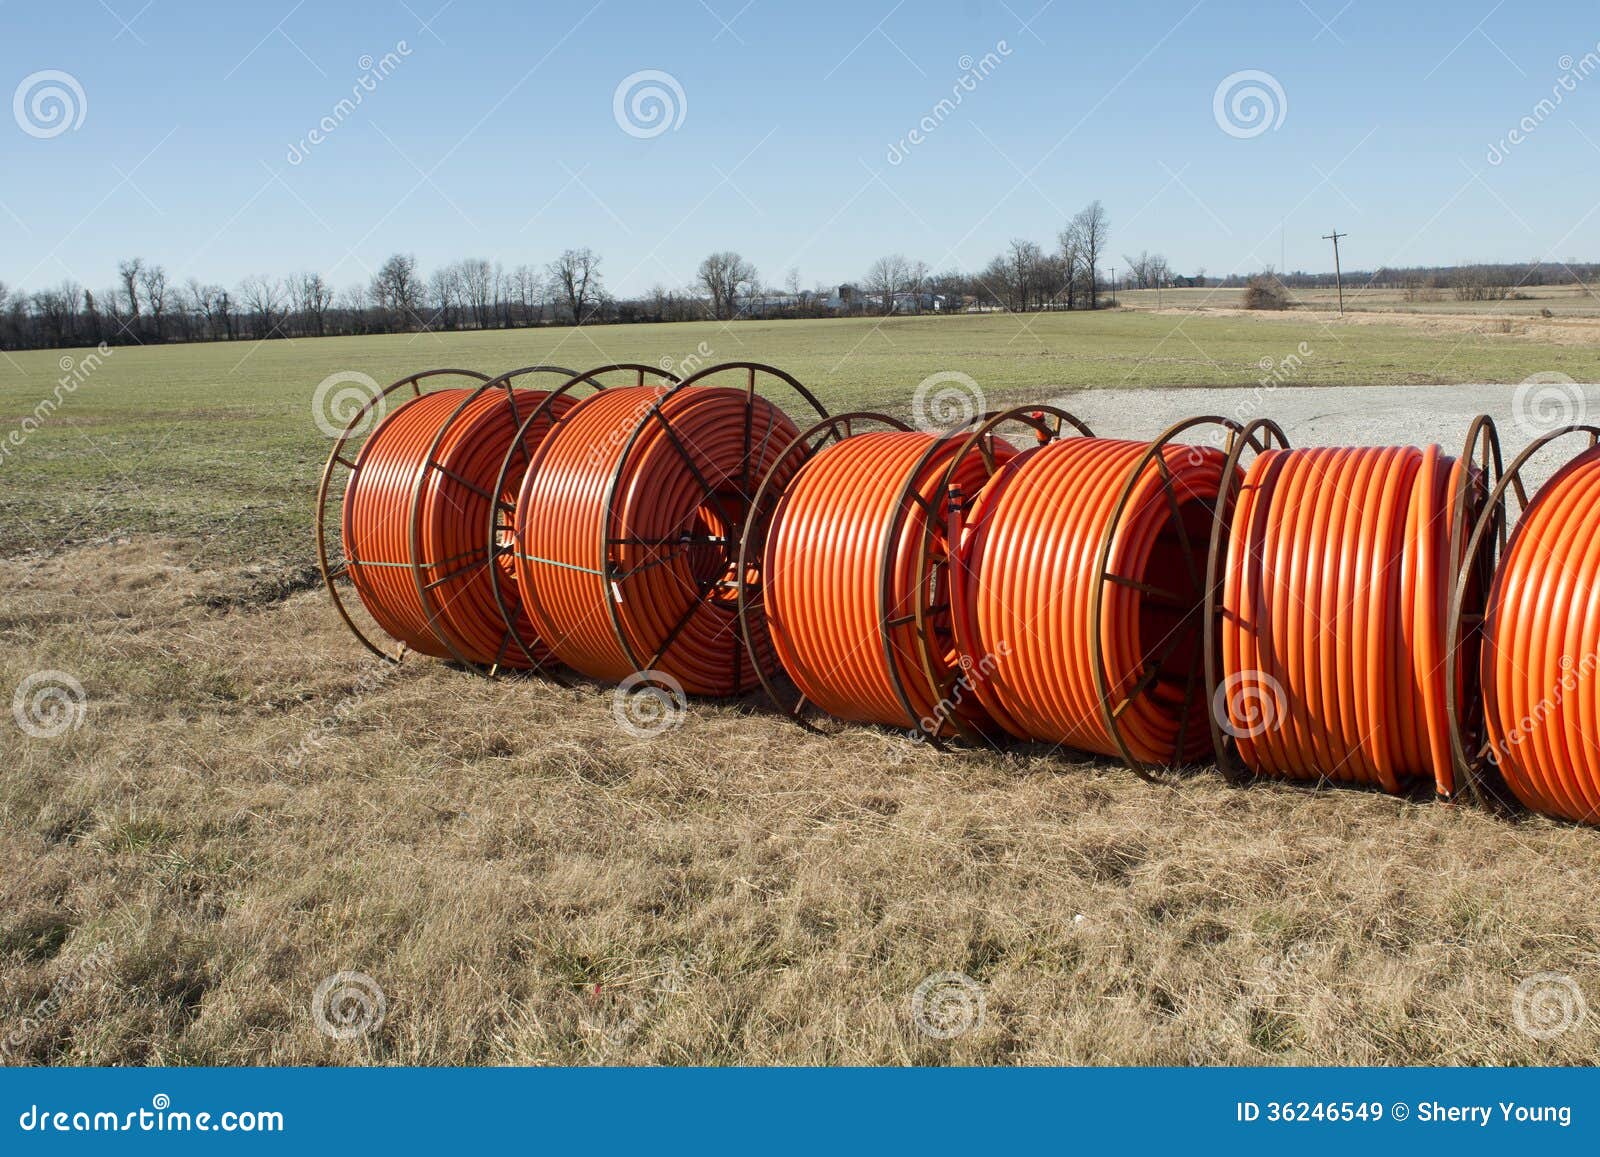 https://thumbs.dreamstime.com/z/rural-fiber-optic-cable-ready-to-be-laid-area-old-barn-silo-background-36246549.jpg